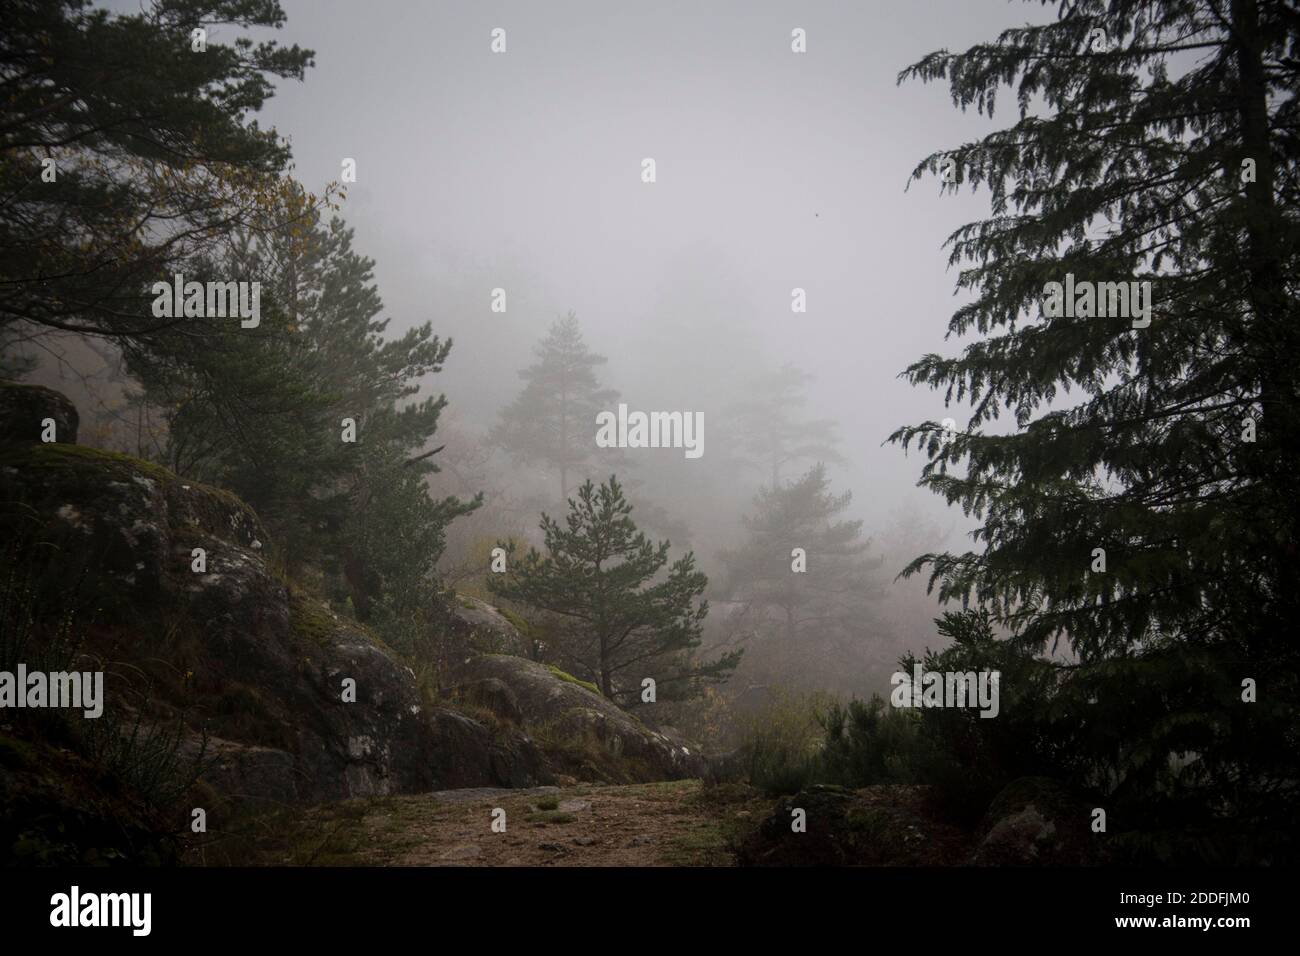 Misty mood landscape, with evergreen trees along a footpath and dense fog covering the background Stock Photo